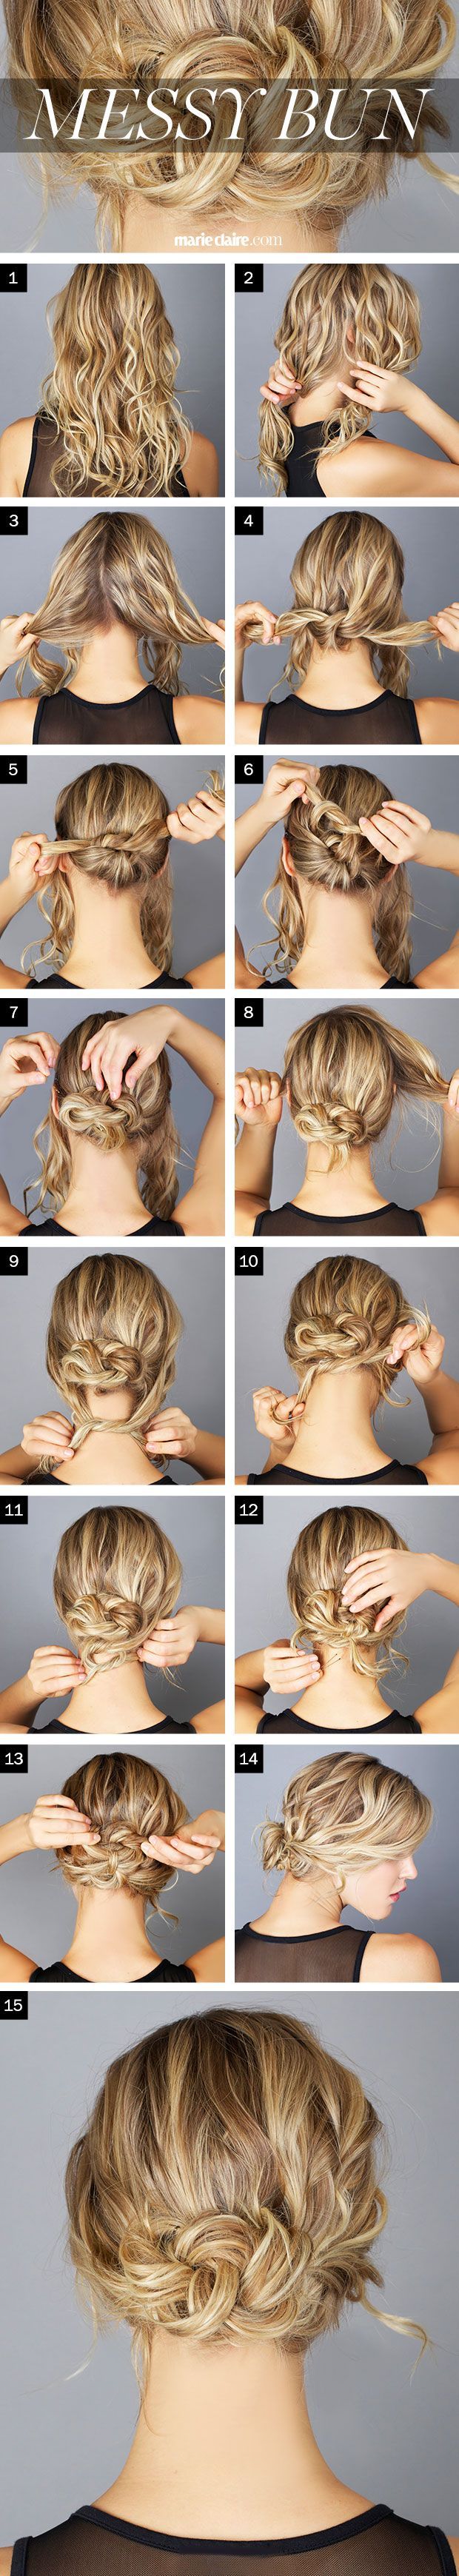 Hair How-To: The Messy Knot Bun (click for step by step instructions) — if you